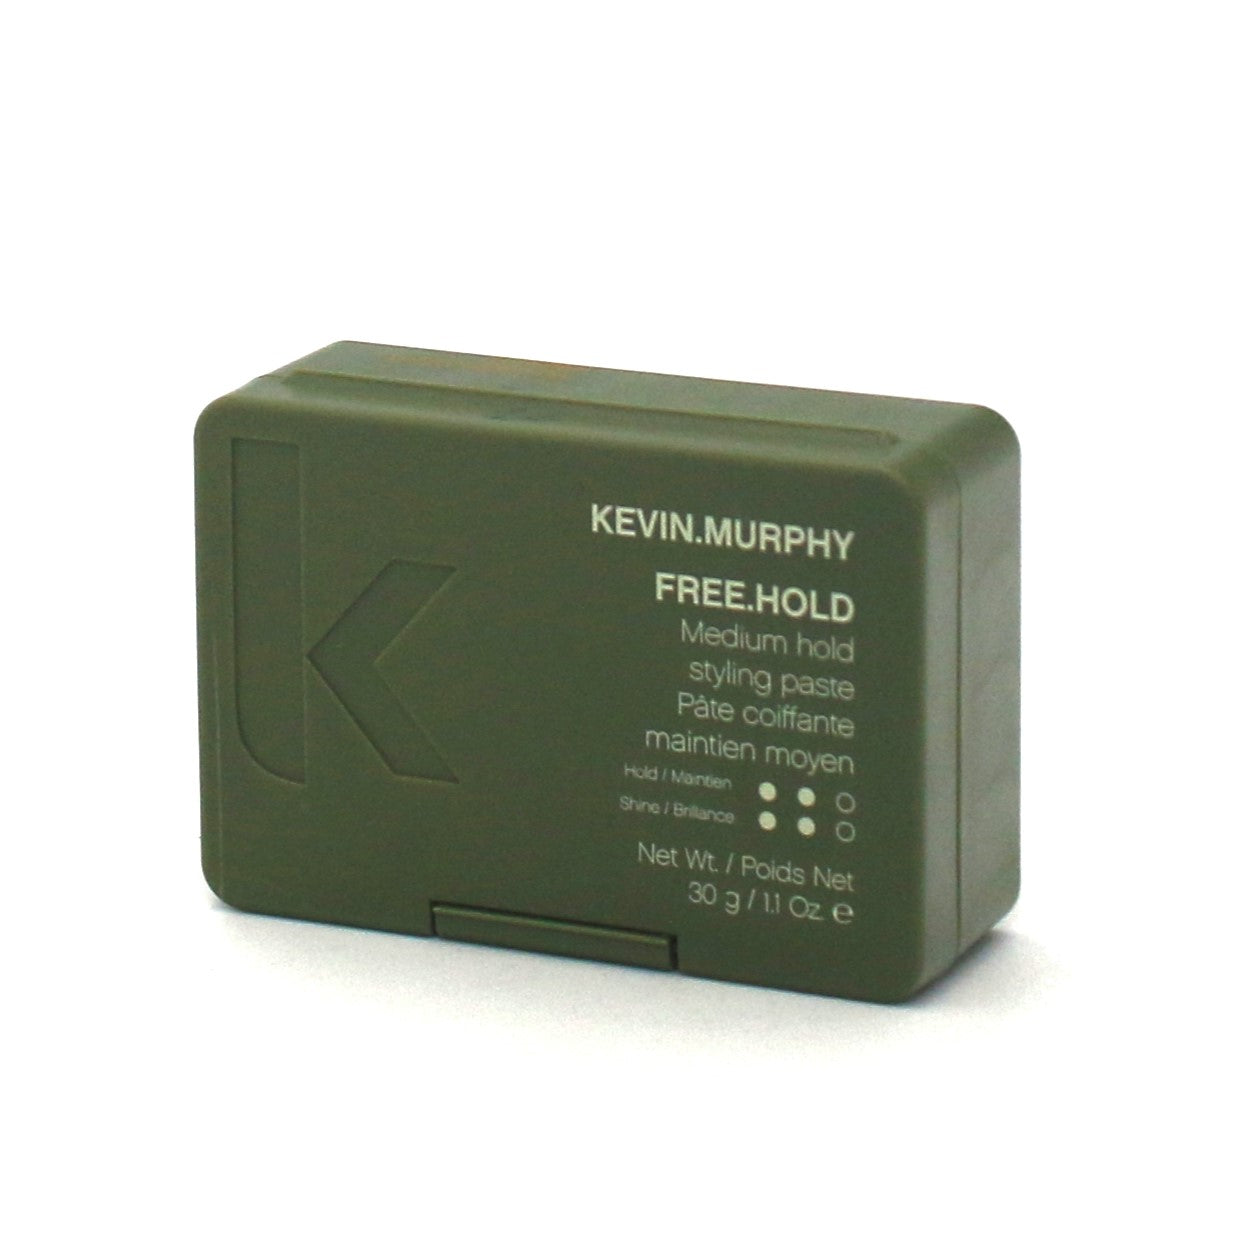 Kevin Murphy Free Hold Medium Hold Styling Paste 1.1 oz